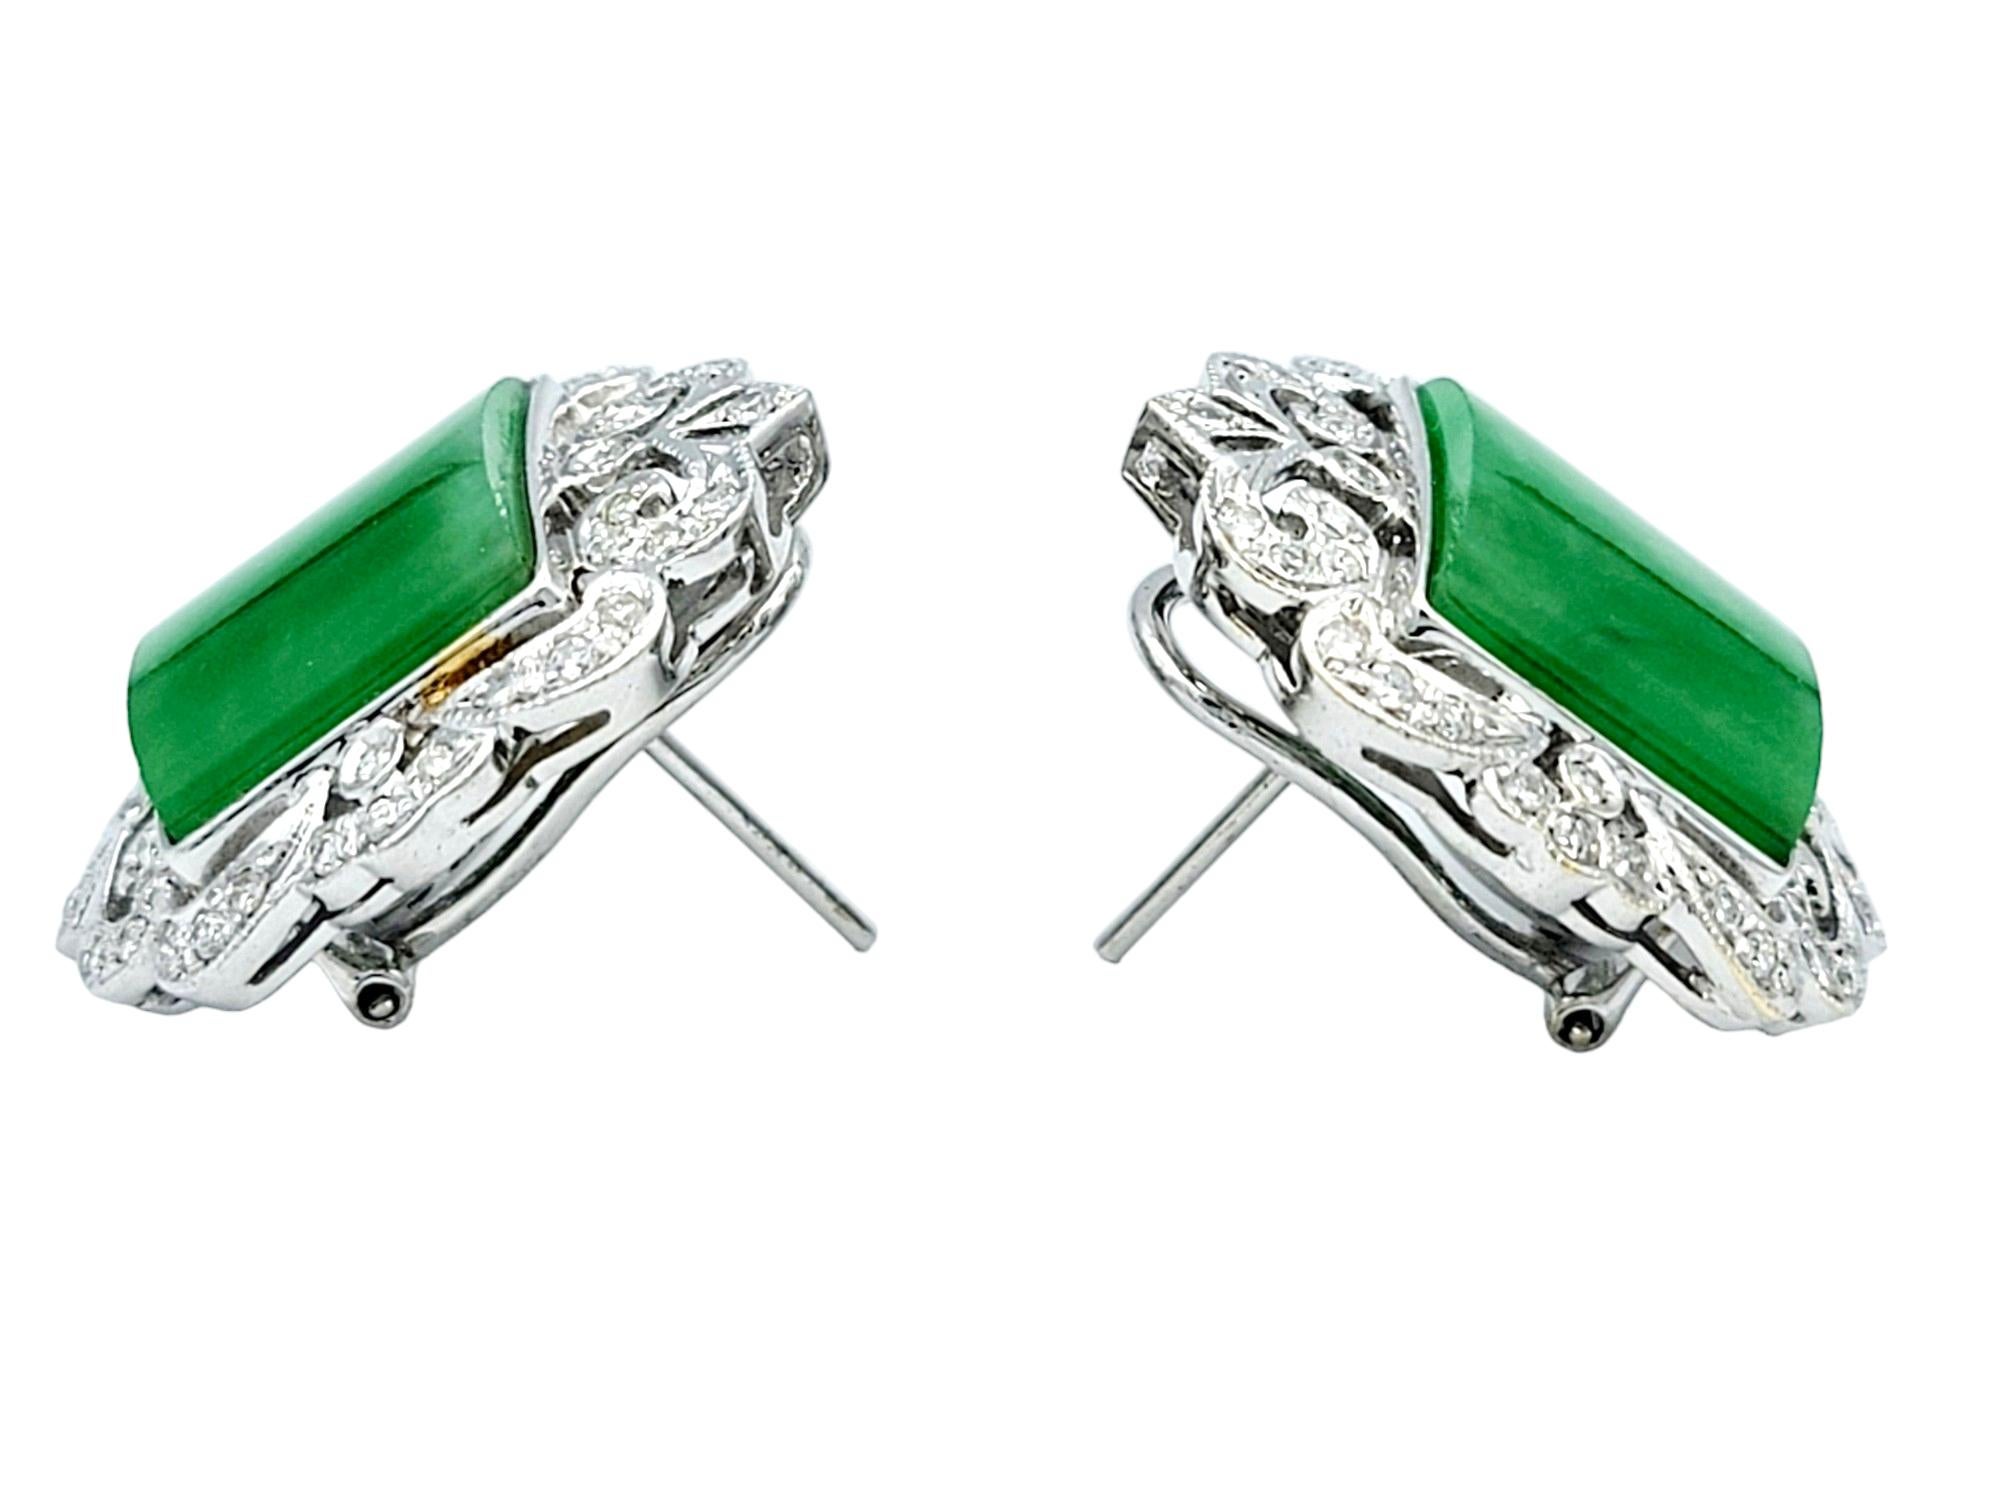 This elegant pair of jadeite and diamond earrings, set in lustrous 18 karat white gold, are a true work of art. The focal point of each earring is a captivating square cabochon jadeite, exuding a rich green hue that symbolizes tranquility and